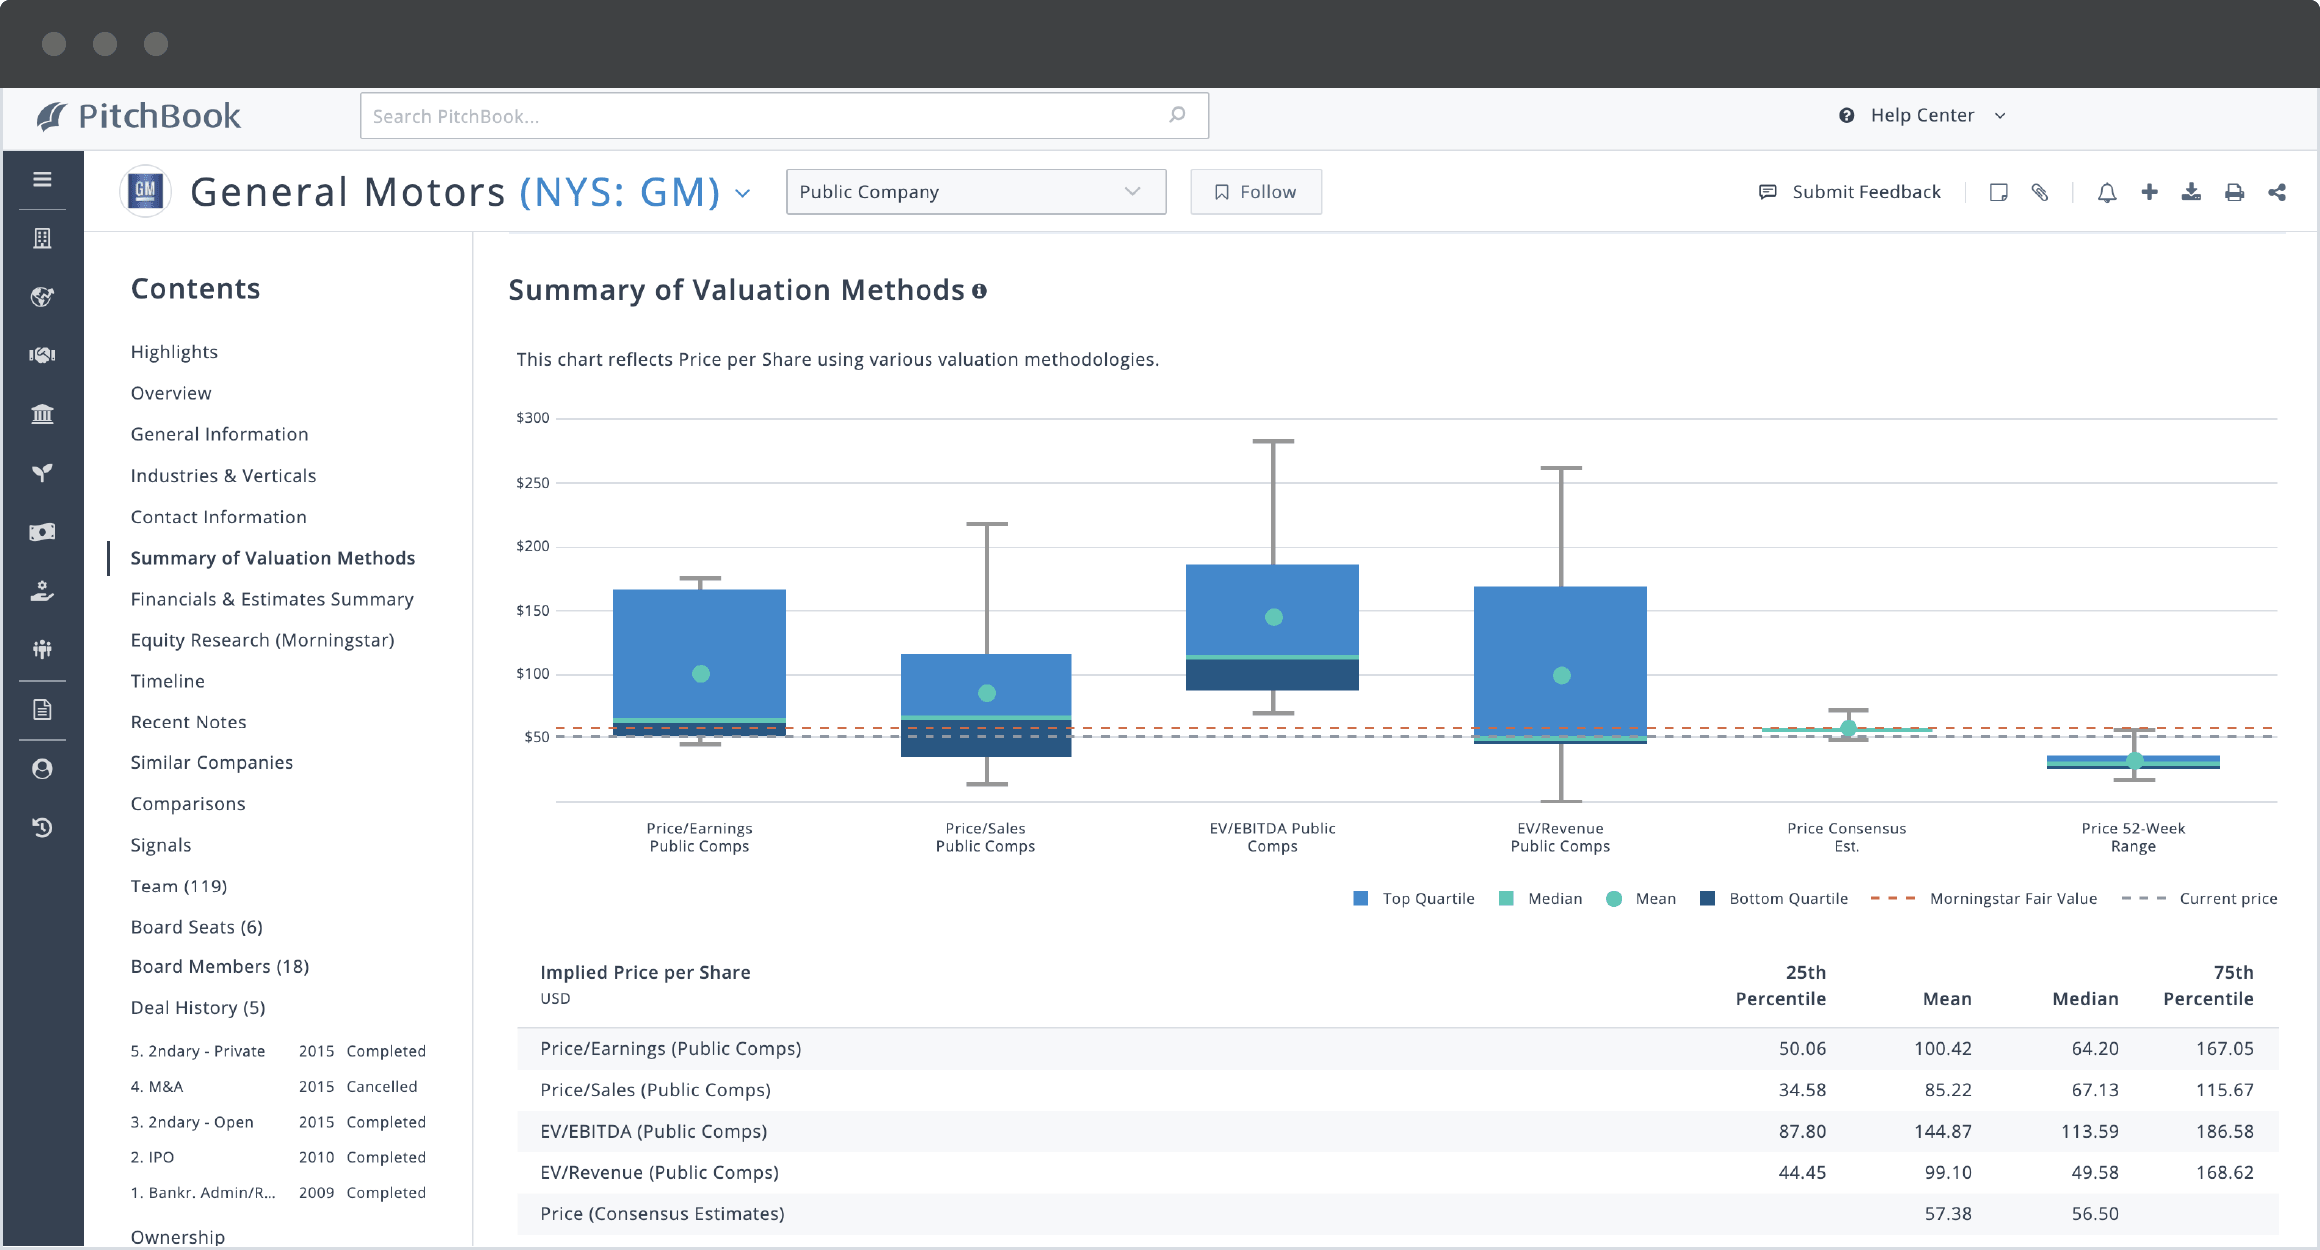 PitchBook financial data for General Motors showing summary of valuation methods, with metrics like price/earnings.